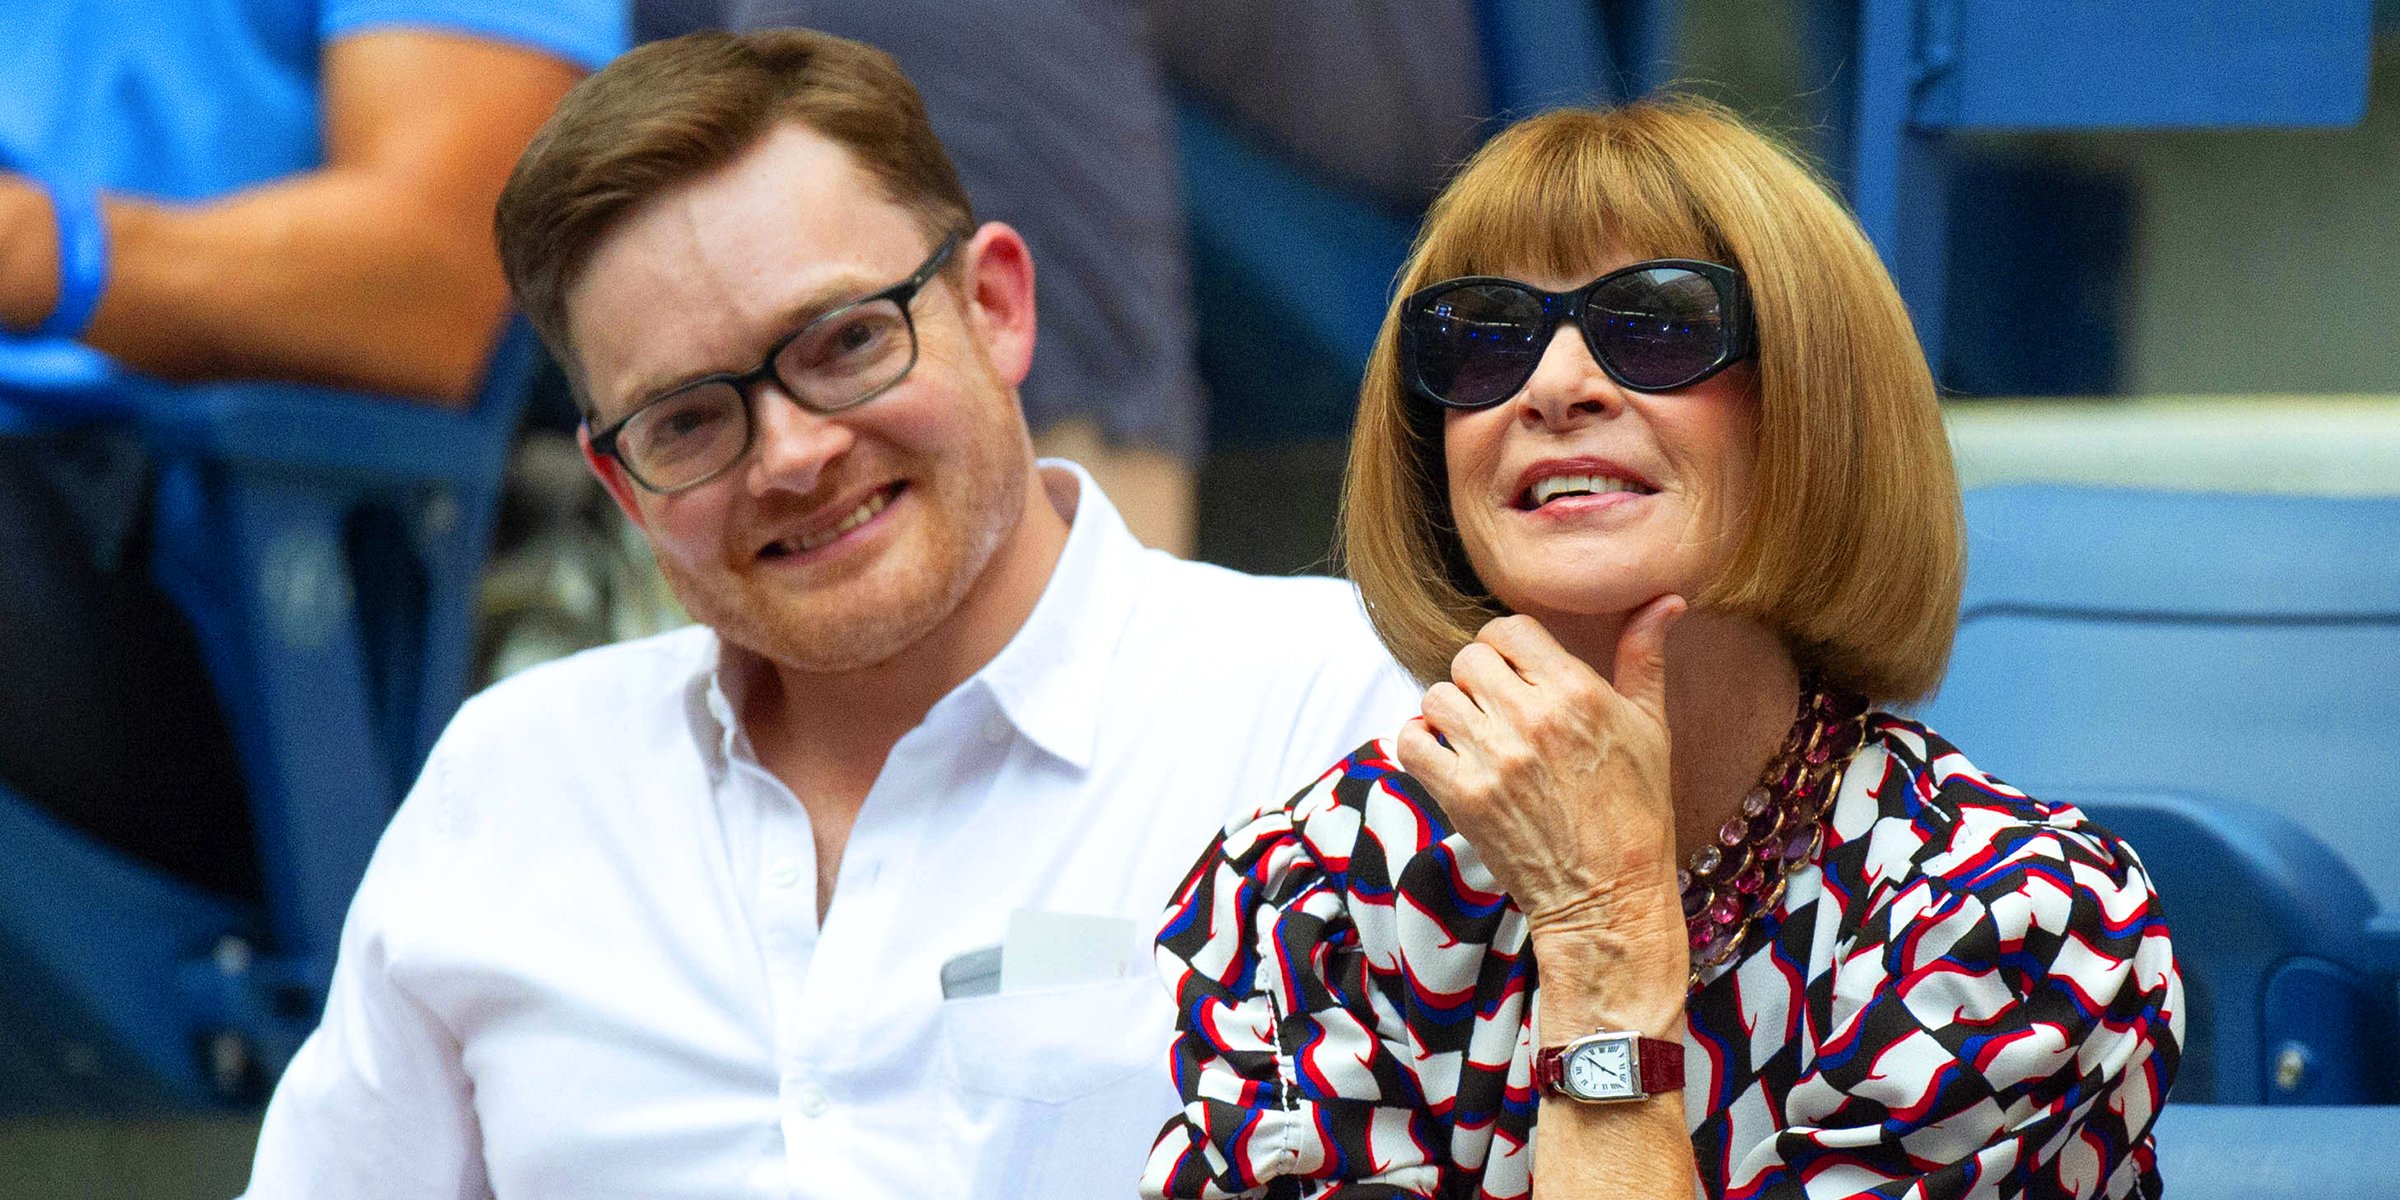 Charles Shaffer and His Mother Anna Wintour | Source: Getty Images